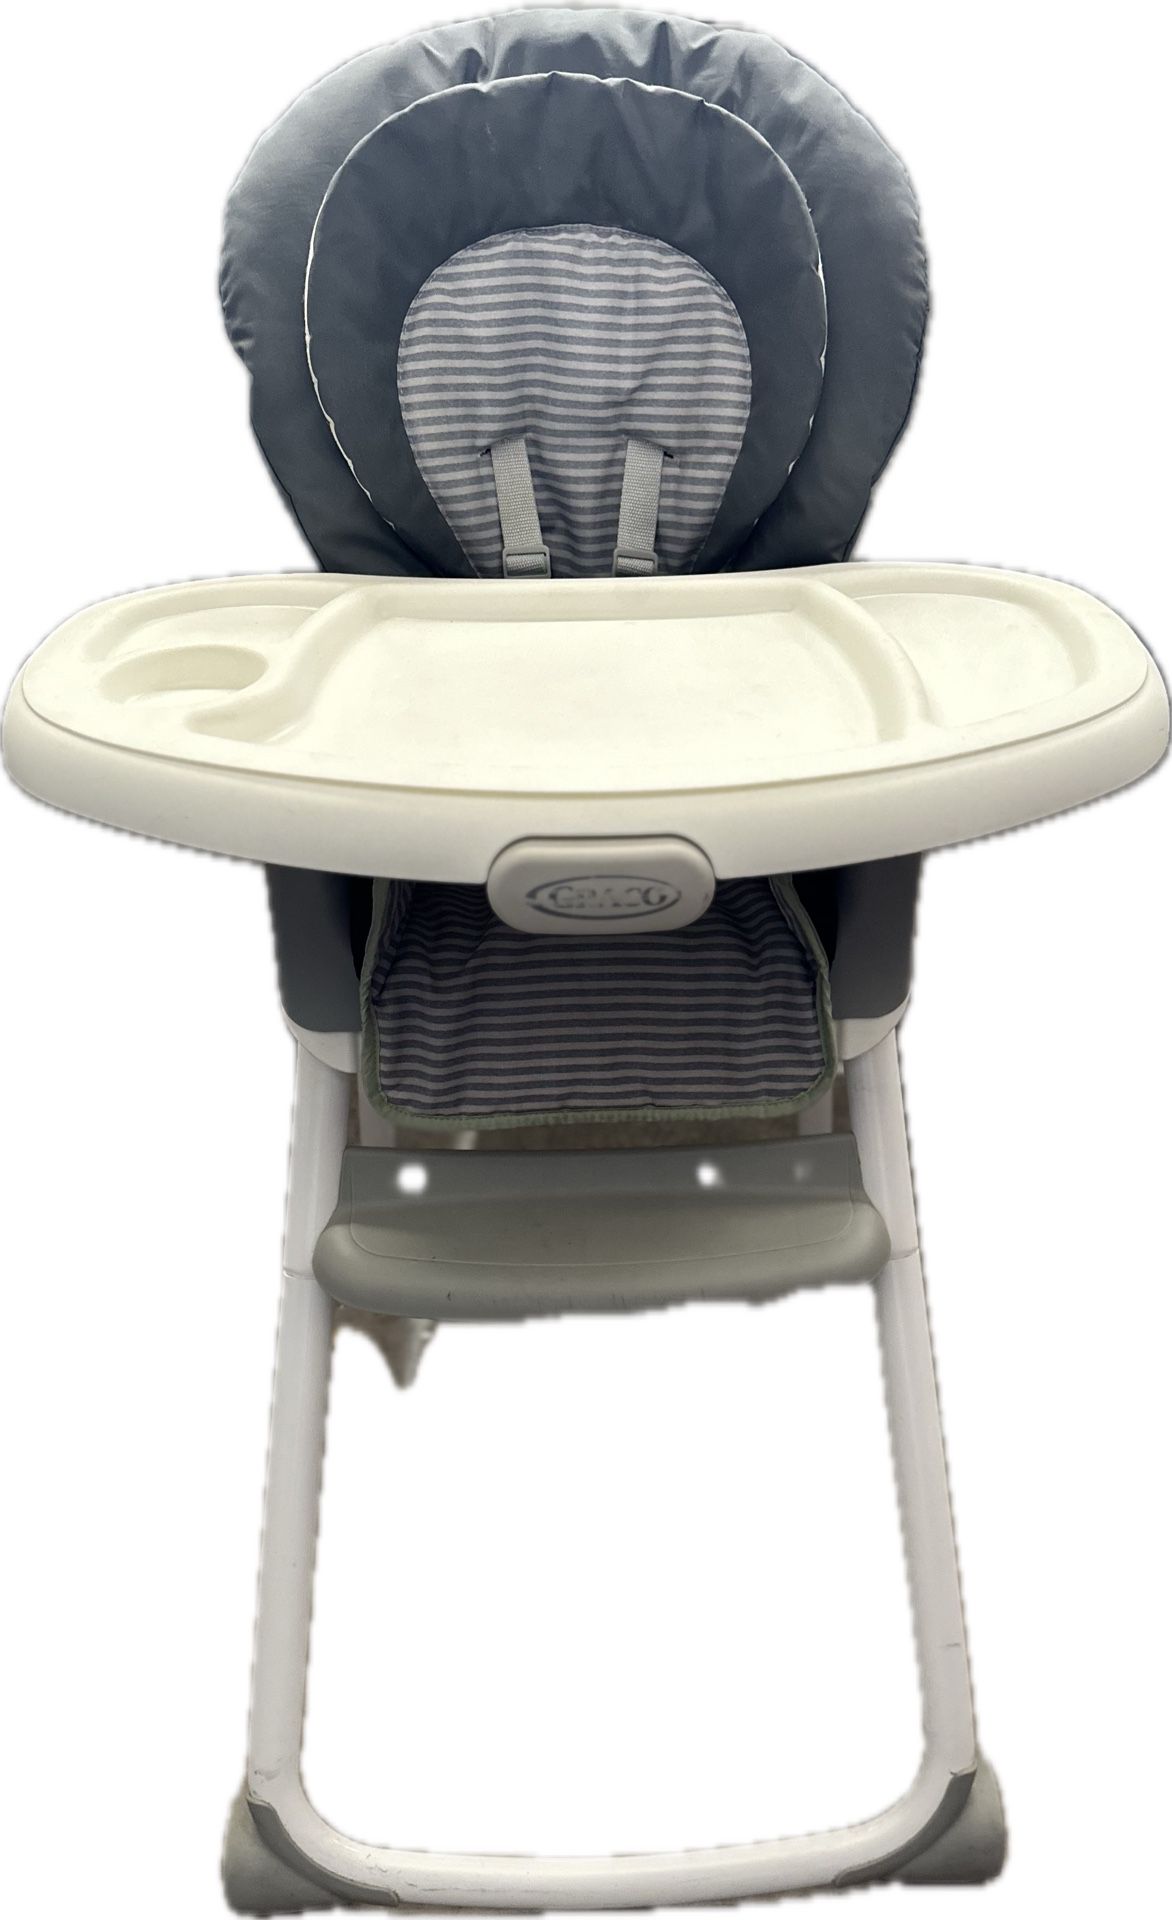 Graco Made 2 Grow 6-in-1 High Chair